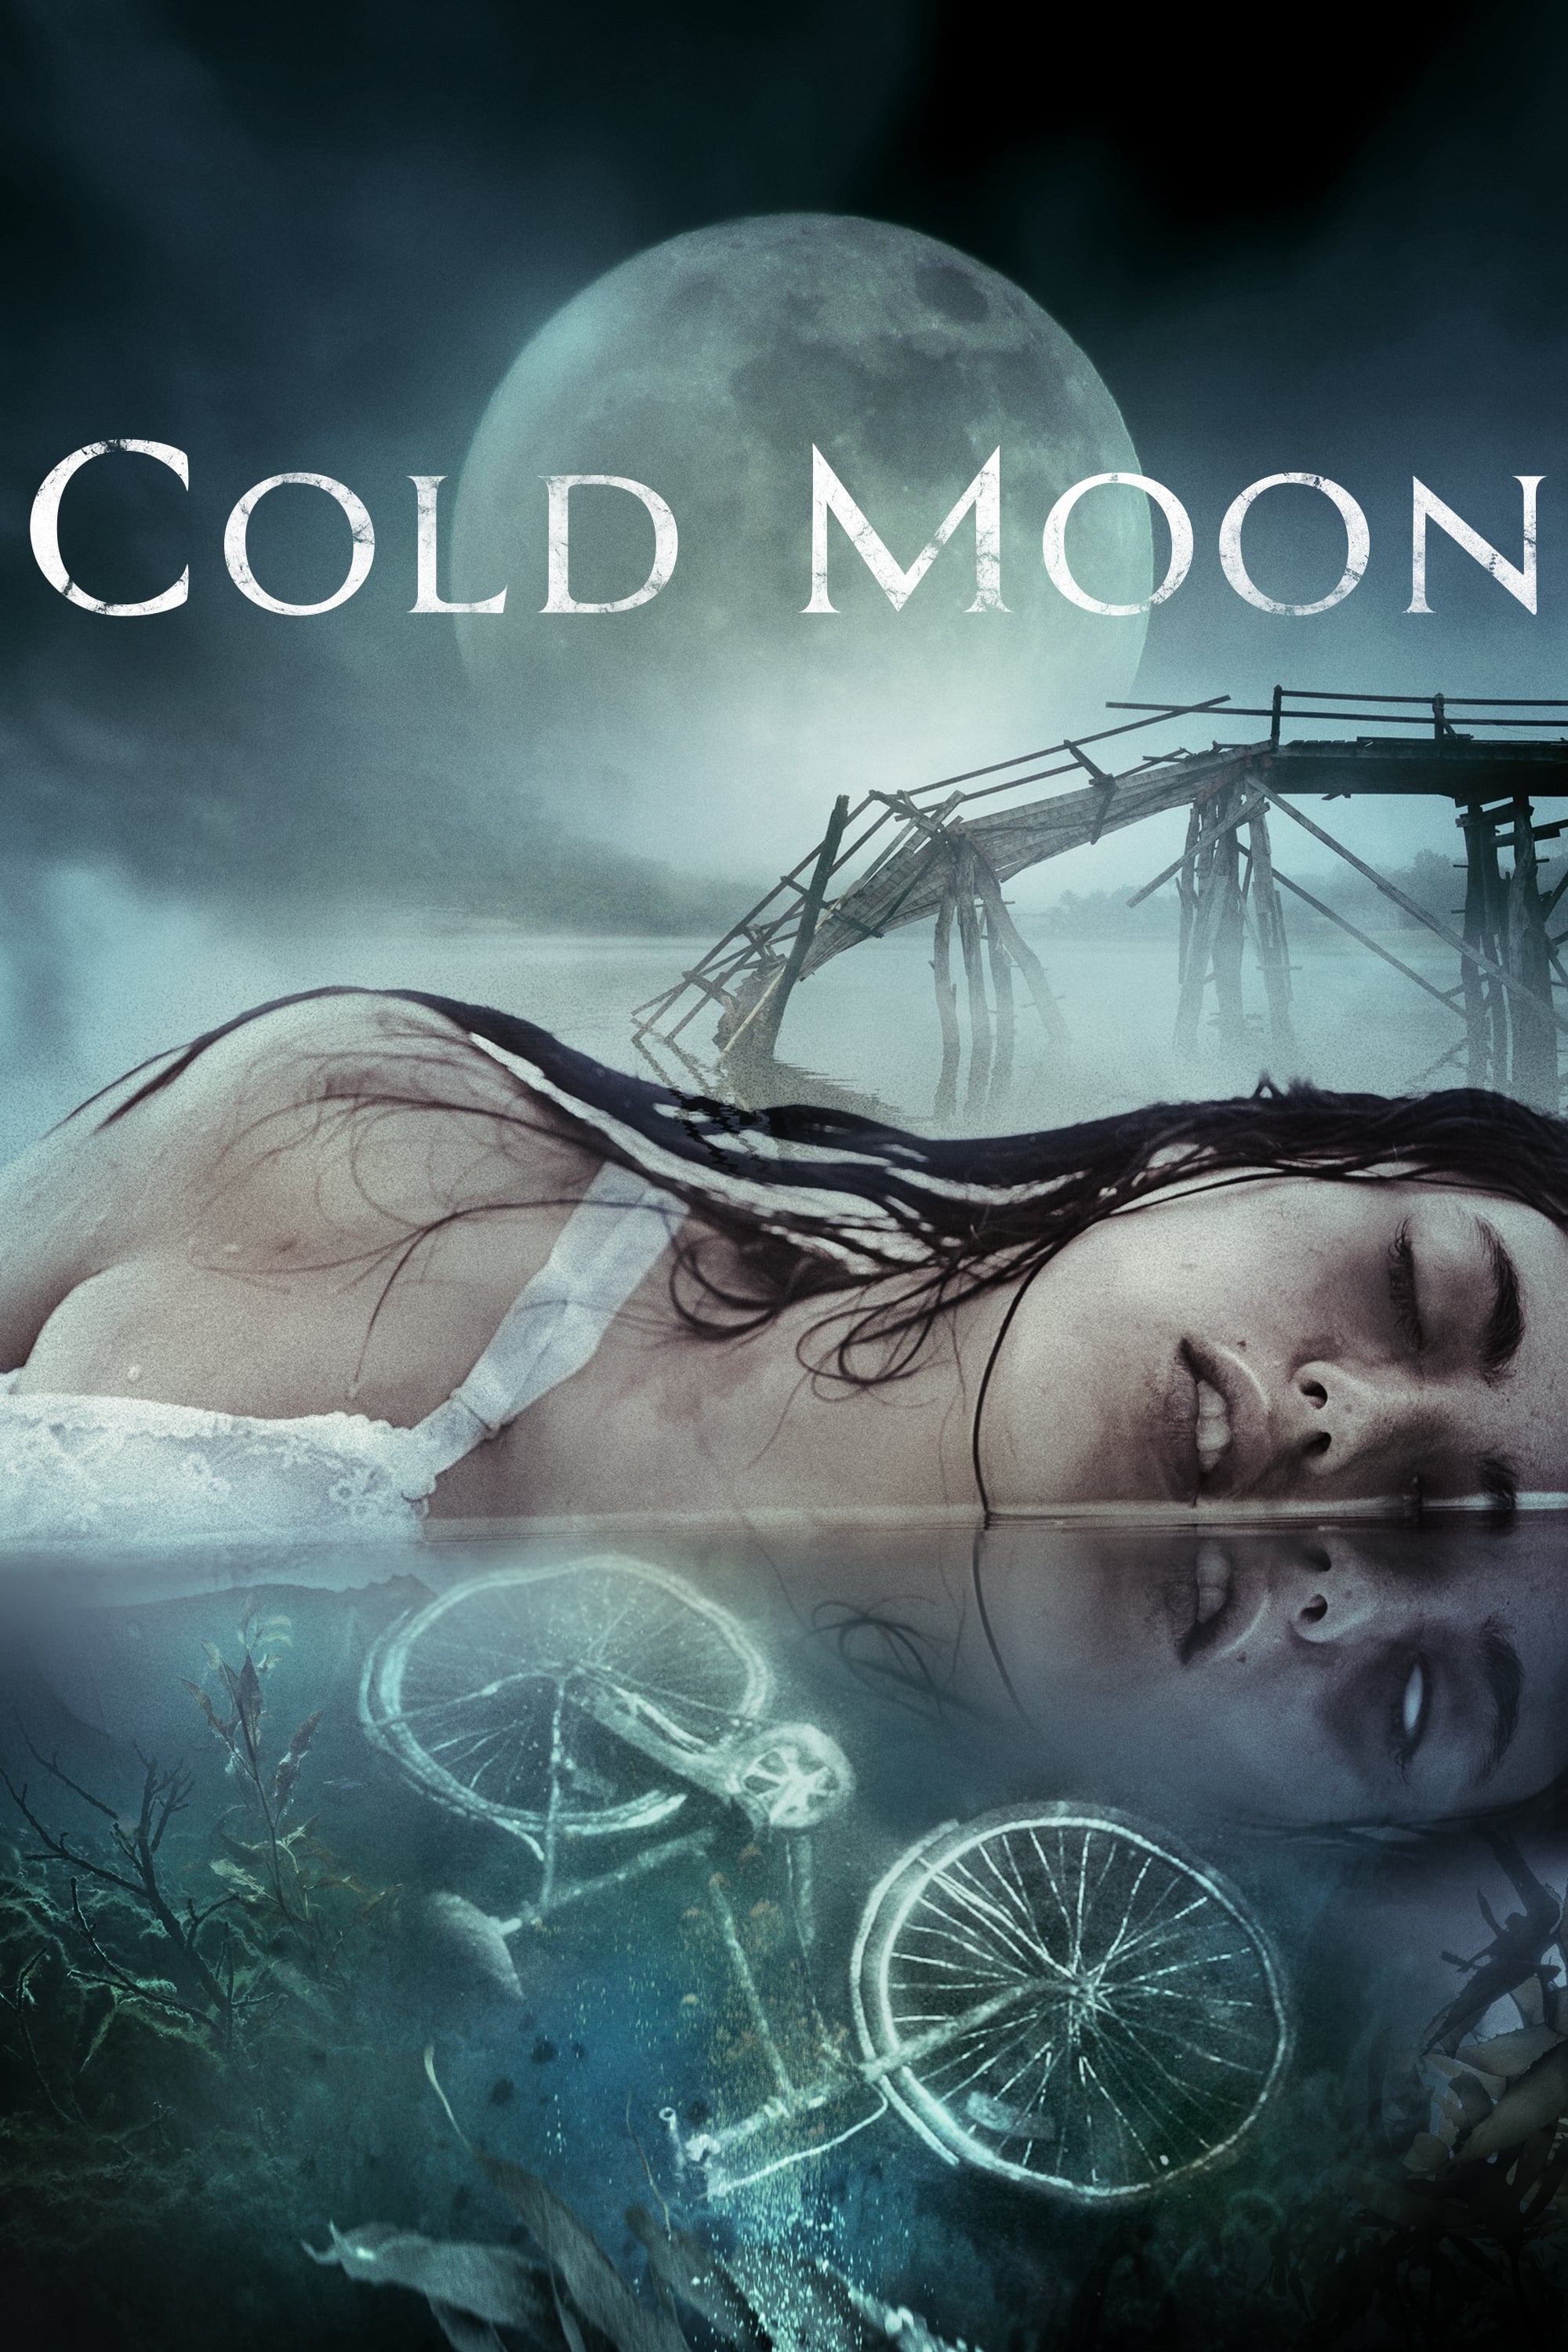 Cold Moon (2016)